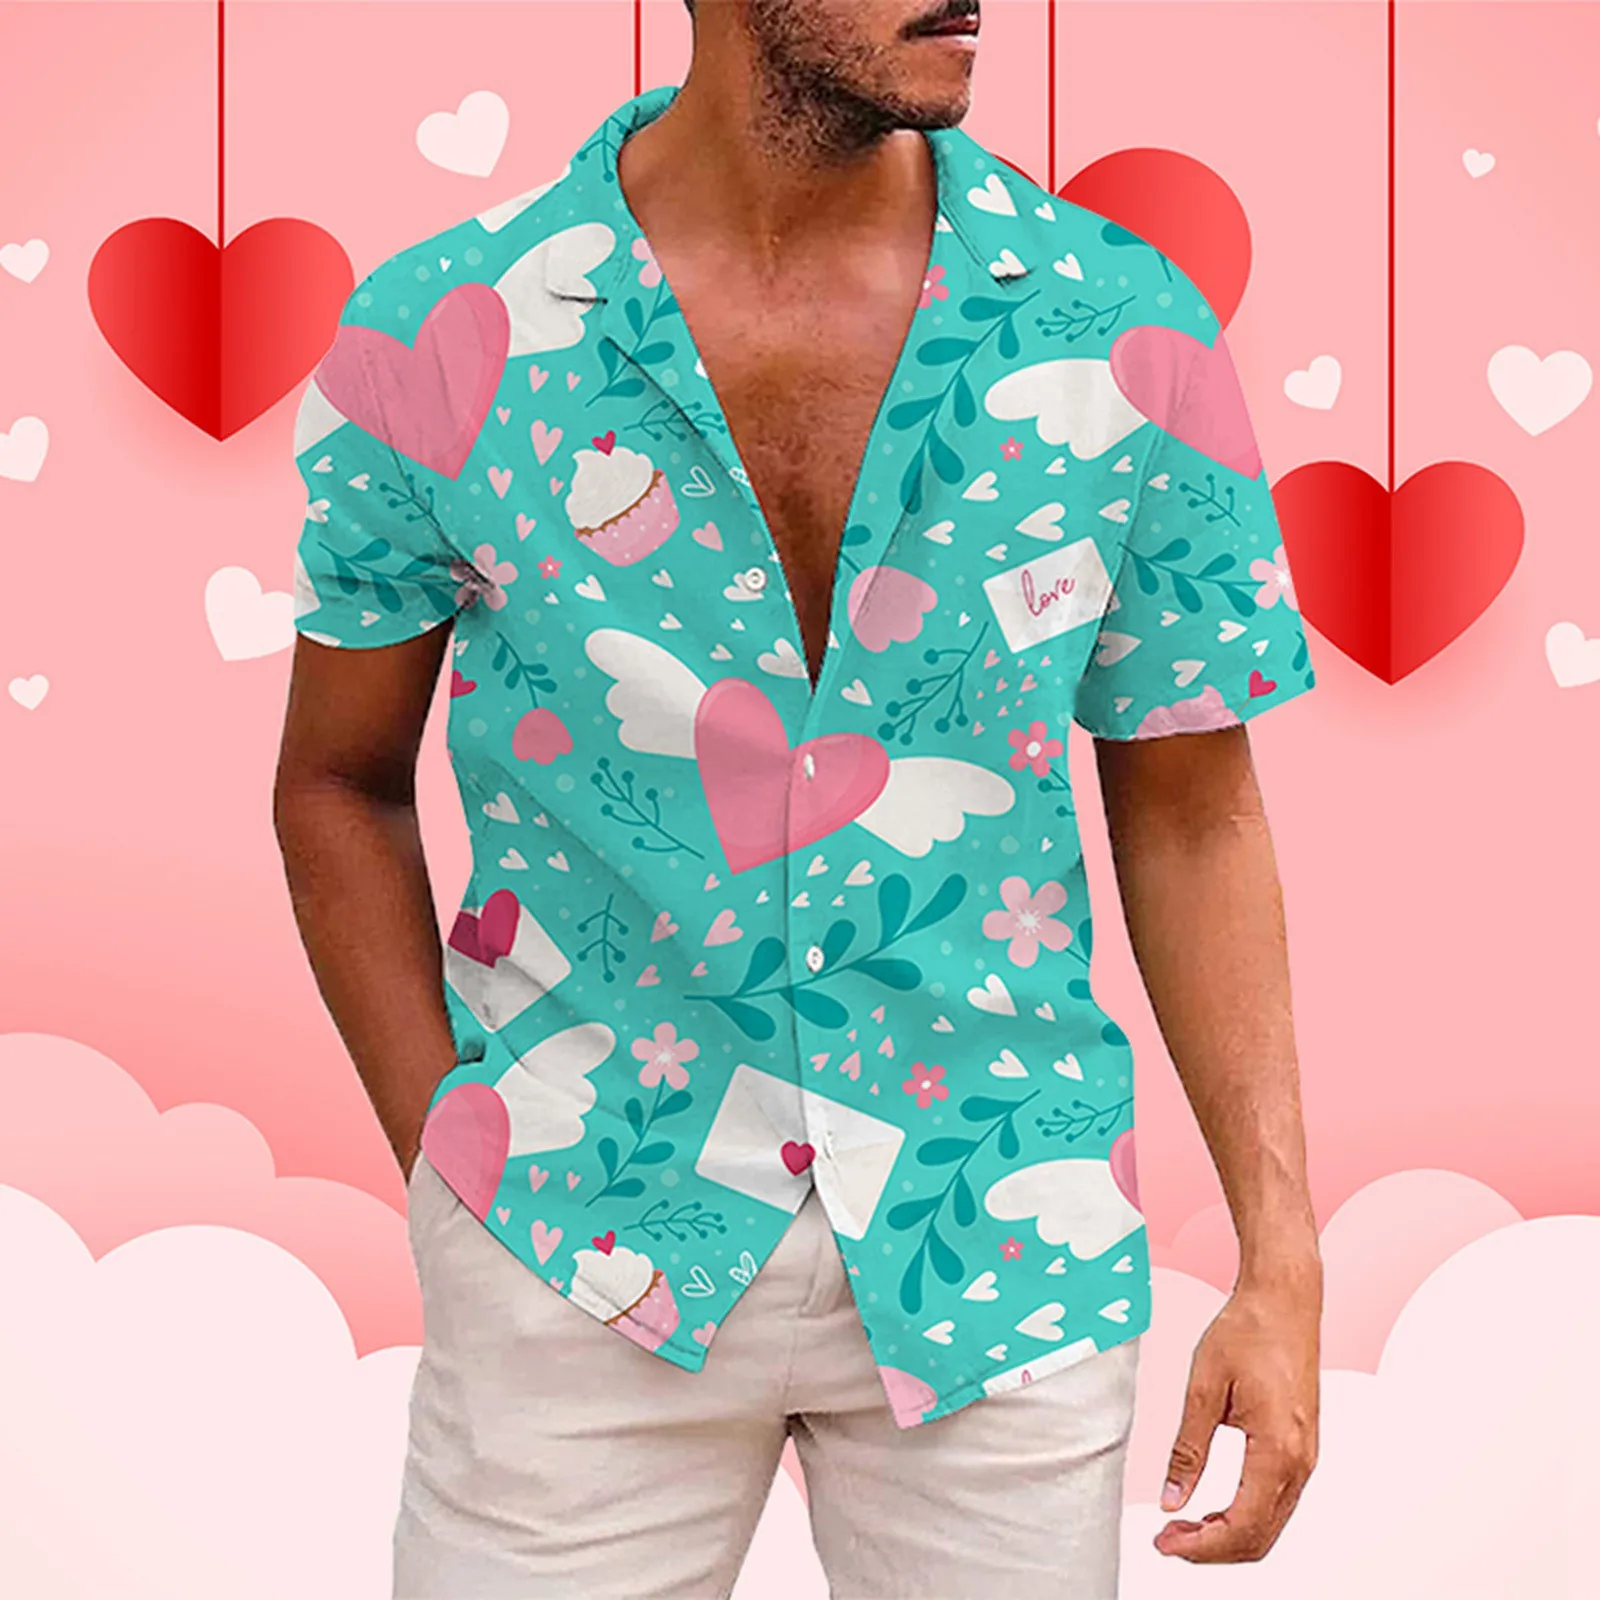 

Valentine's Day Men's Valentine's Day Short Sleeve Shirt Autumn Casual 3D Printing Hawaii Short Gift For Lovers Couple Clothes